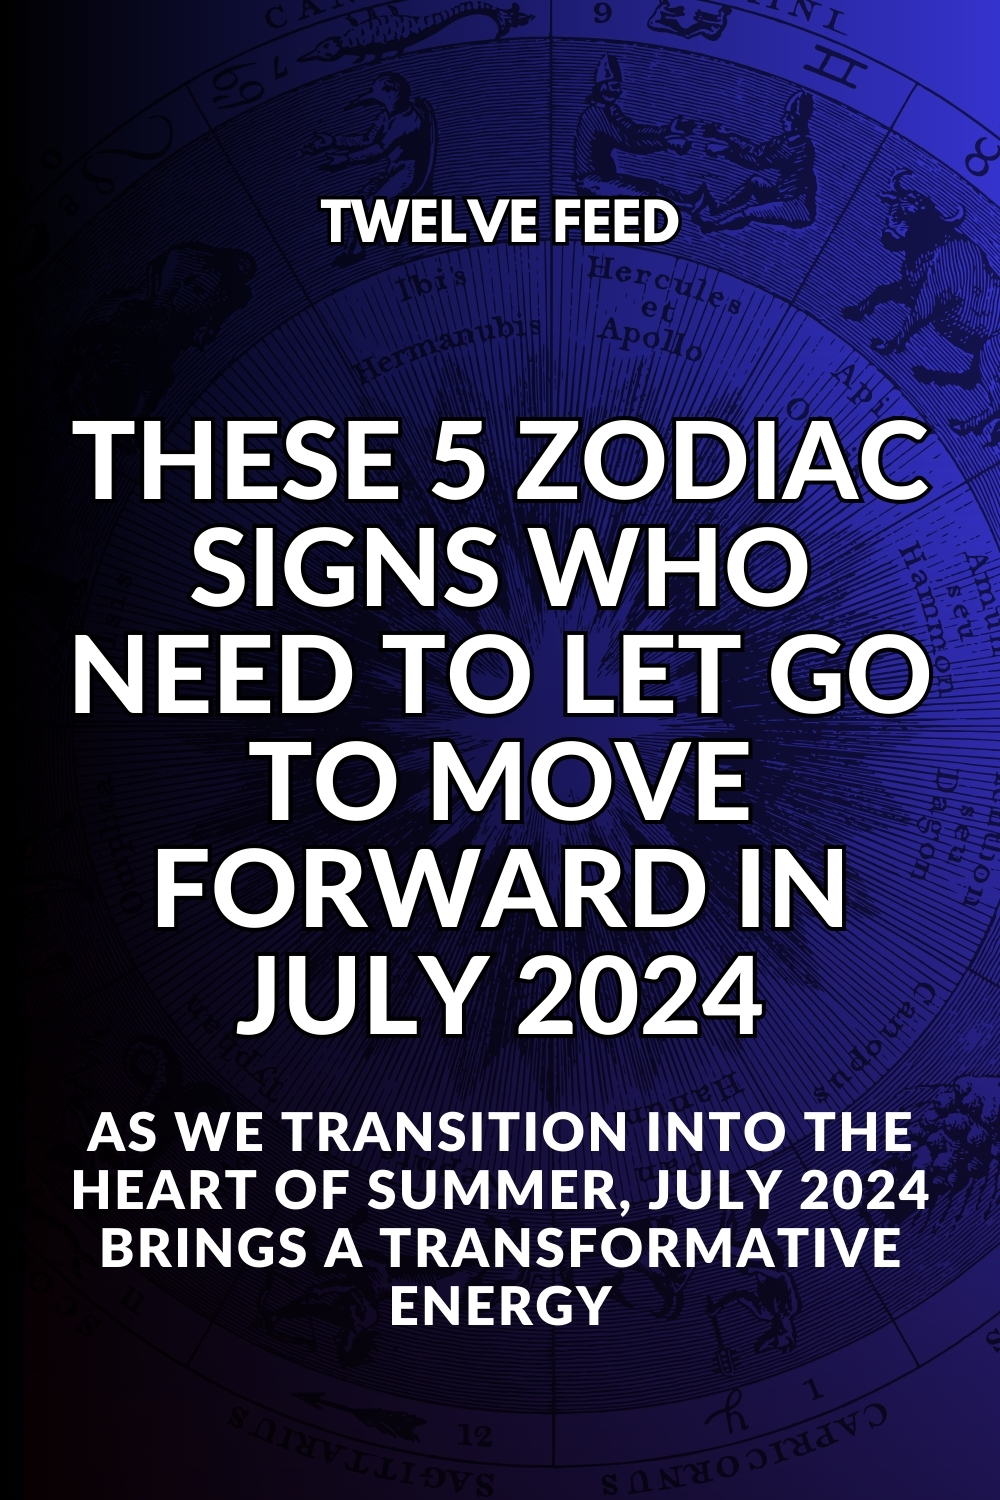 These 5 Zodiac Signs Who Need To Let Go To Move Forward In July 2024